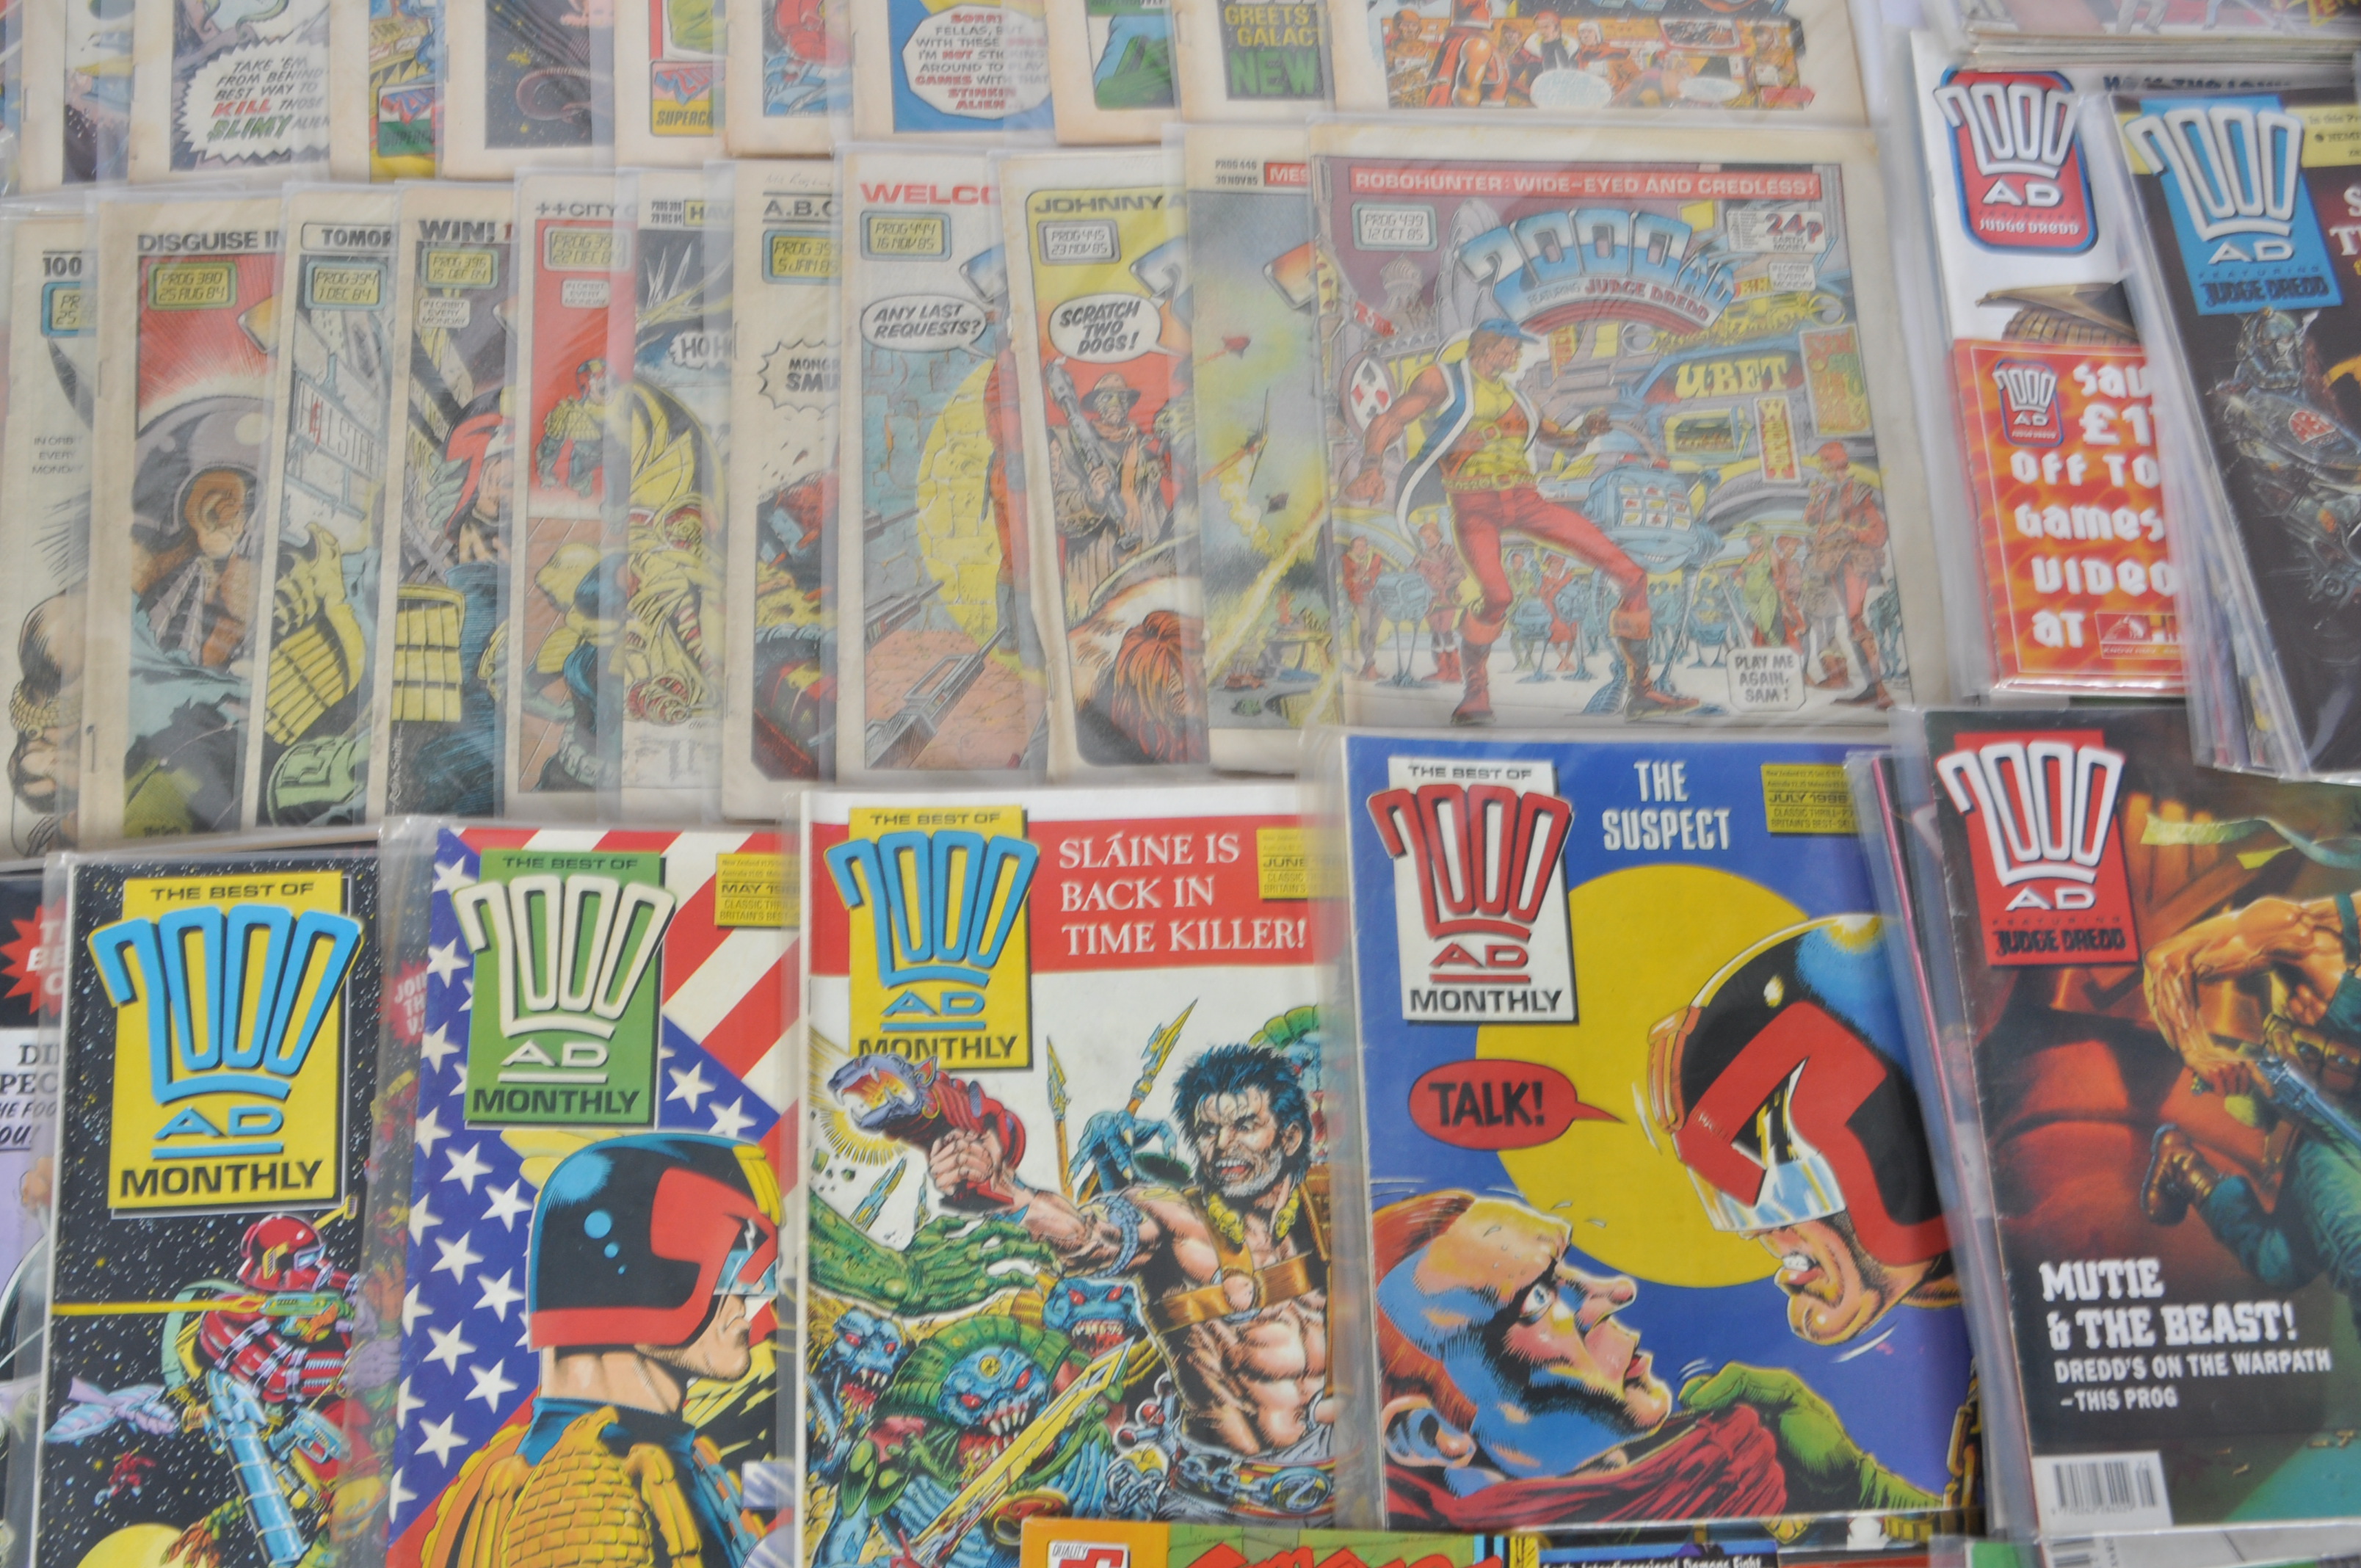 COMIC BOOKS - 2000AD - LARGE COLLECTION OF VINTAGE COMIC BOOKS - Image 14 of 17